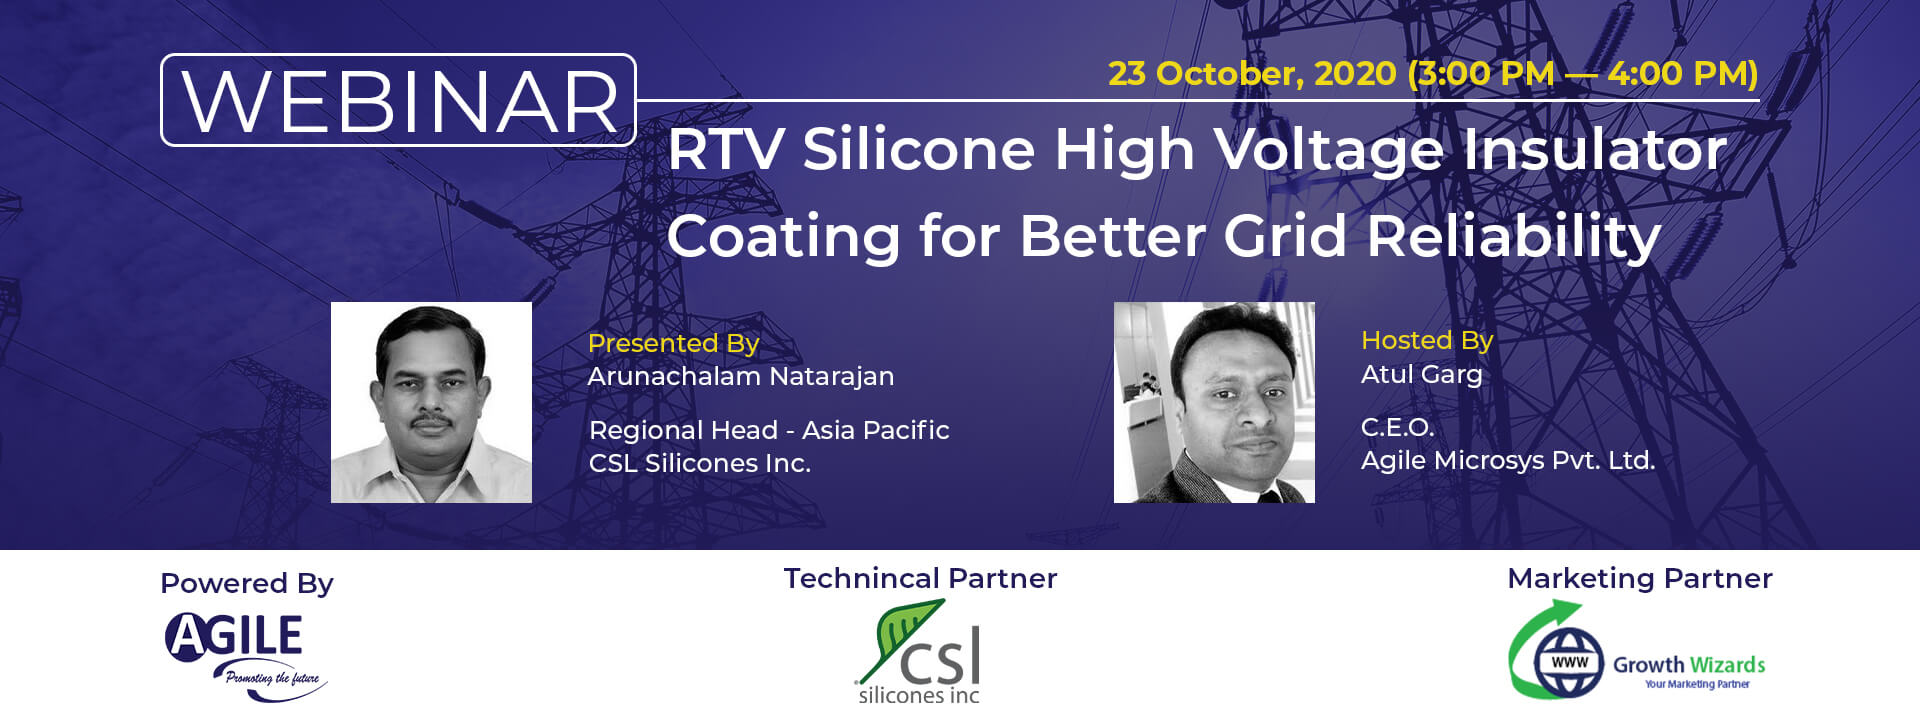 RTV SIlicone High Voltage Insulator Coating for Better Grid Reliability - webinar